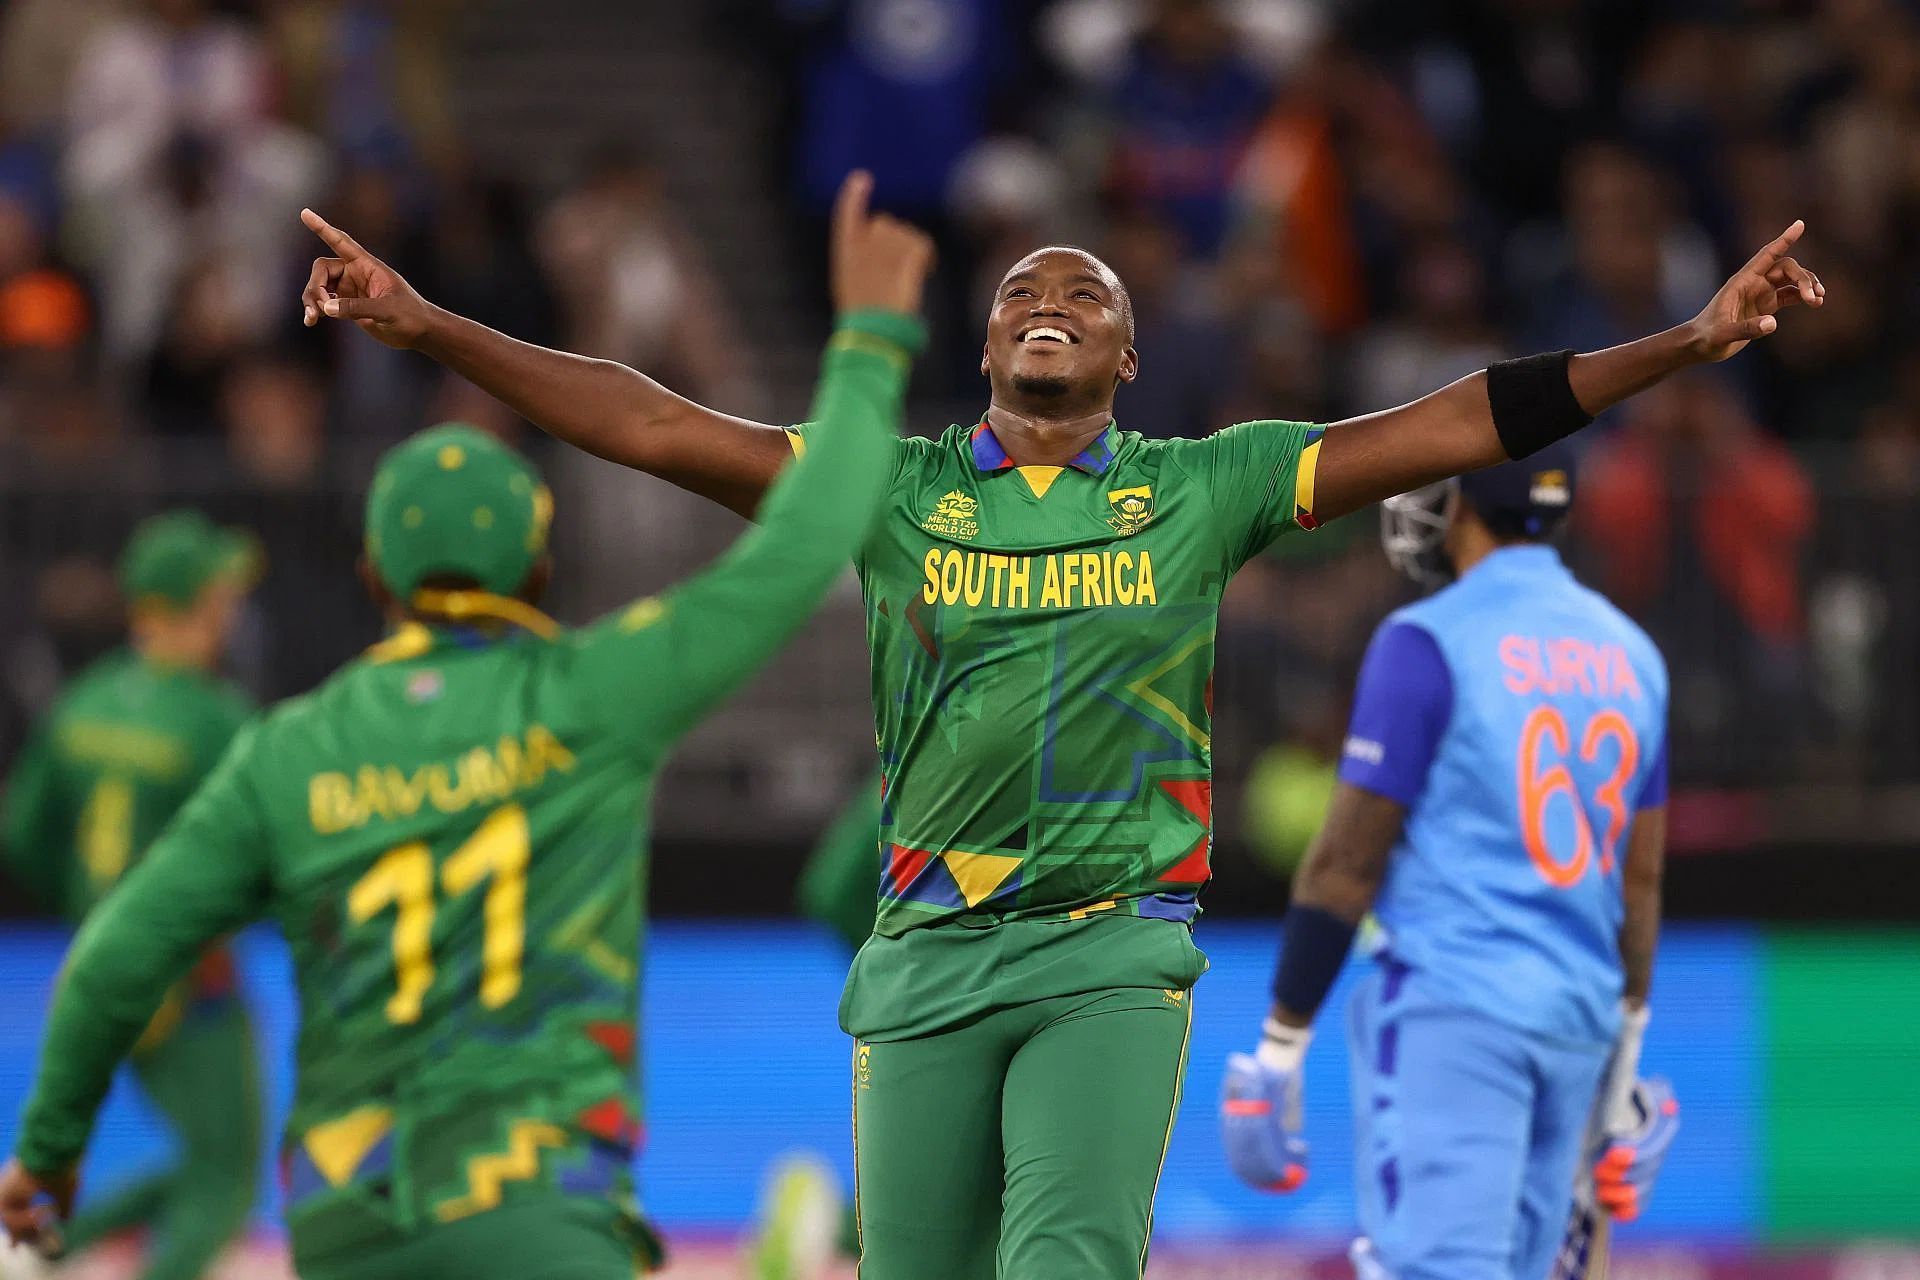 Team India&rsquo;s batters faltered against South Africa in Perth on a pitch that had pace and bounce. Lungi Ngidi claimed four of the first five Indian wickets to fall as the Men in Blue lost half their side for 49 inside nine overs. Pic: Getty Images